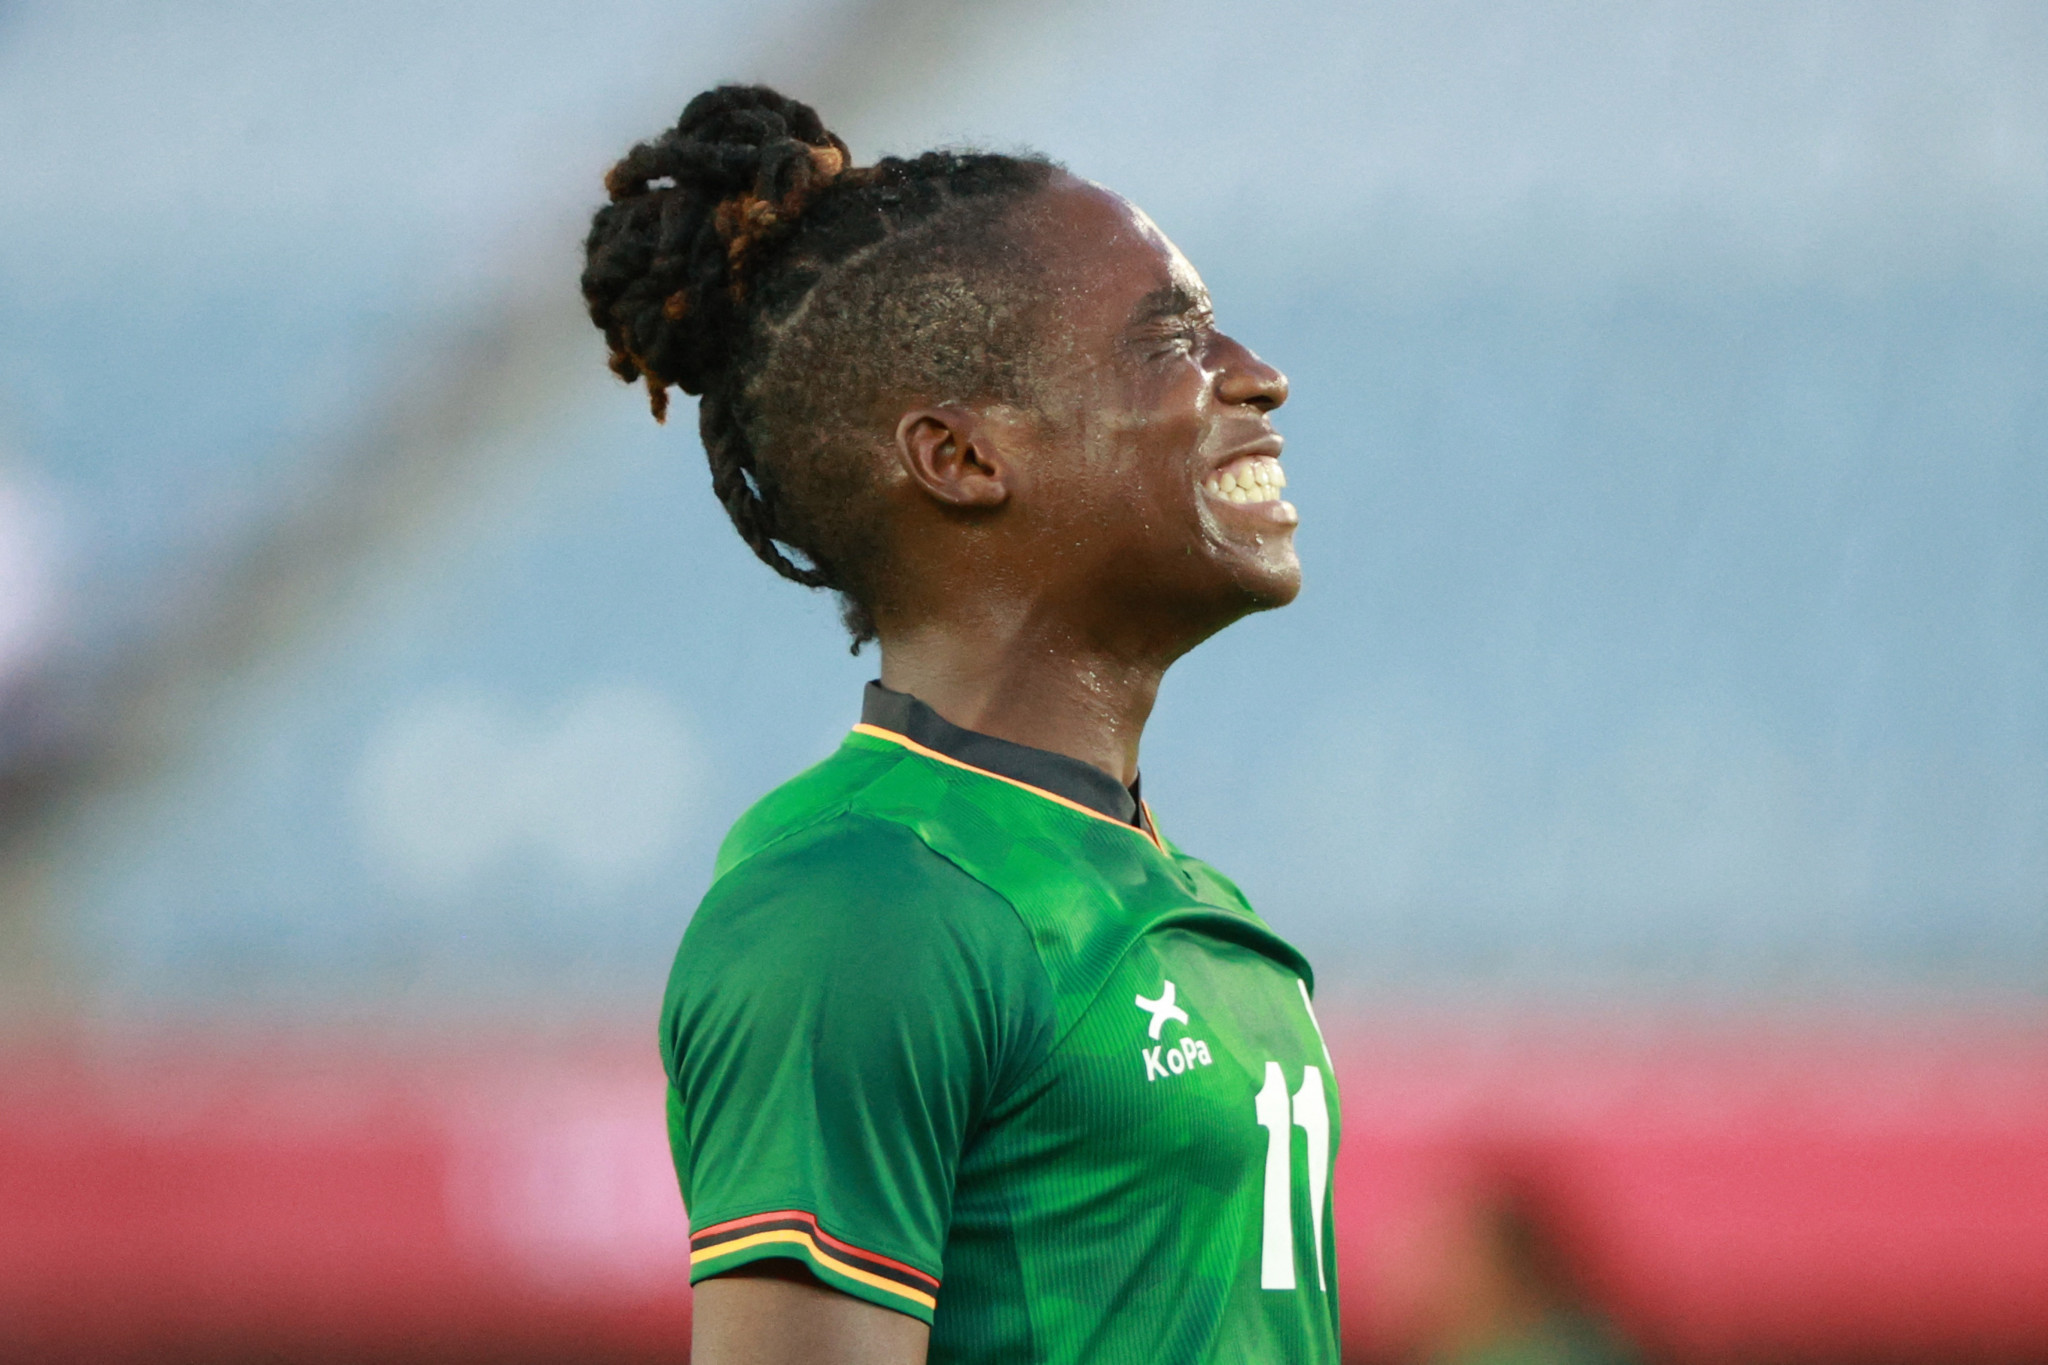 Barbra Banda scored two hat-tricks for Zambia at Tokyo 2020 ©Getty Images